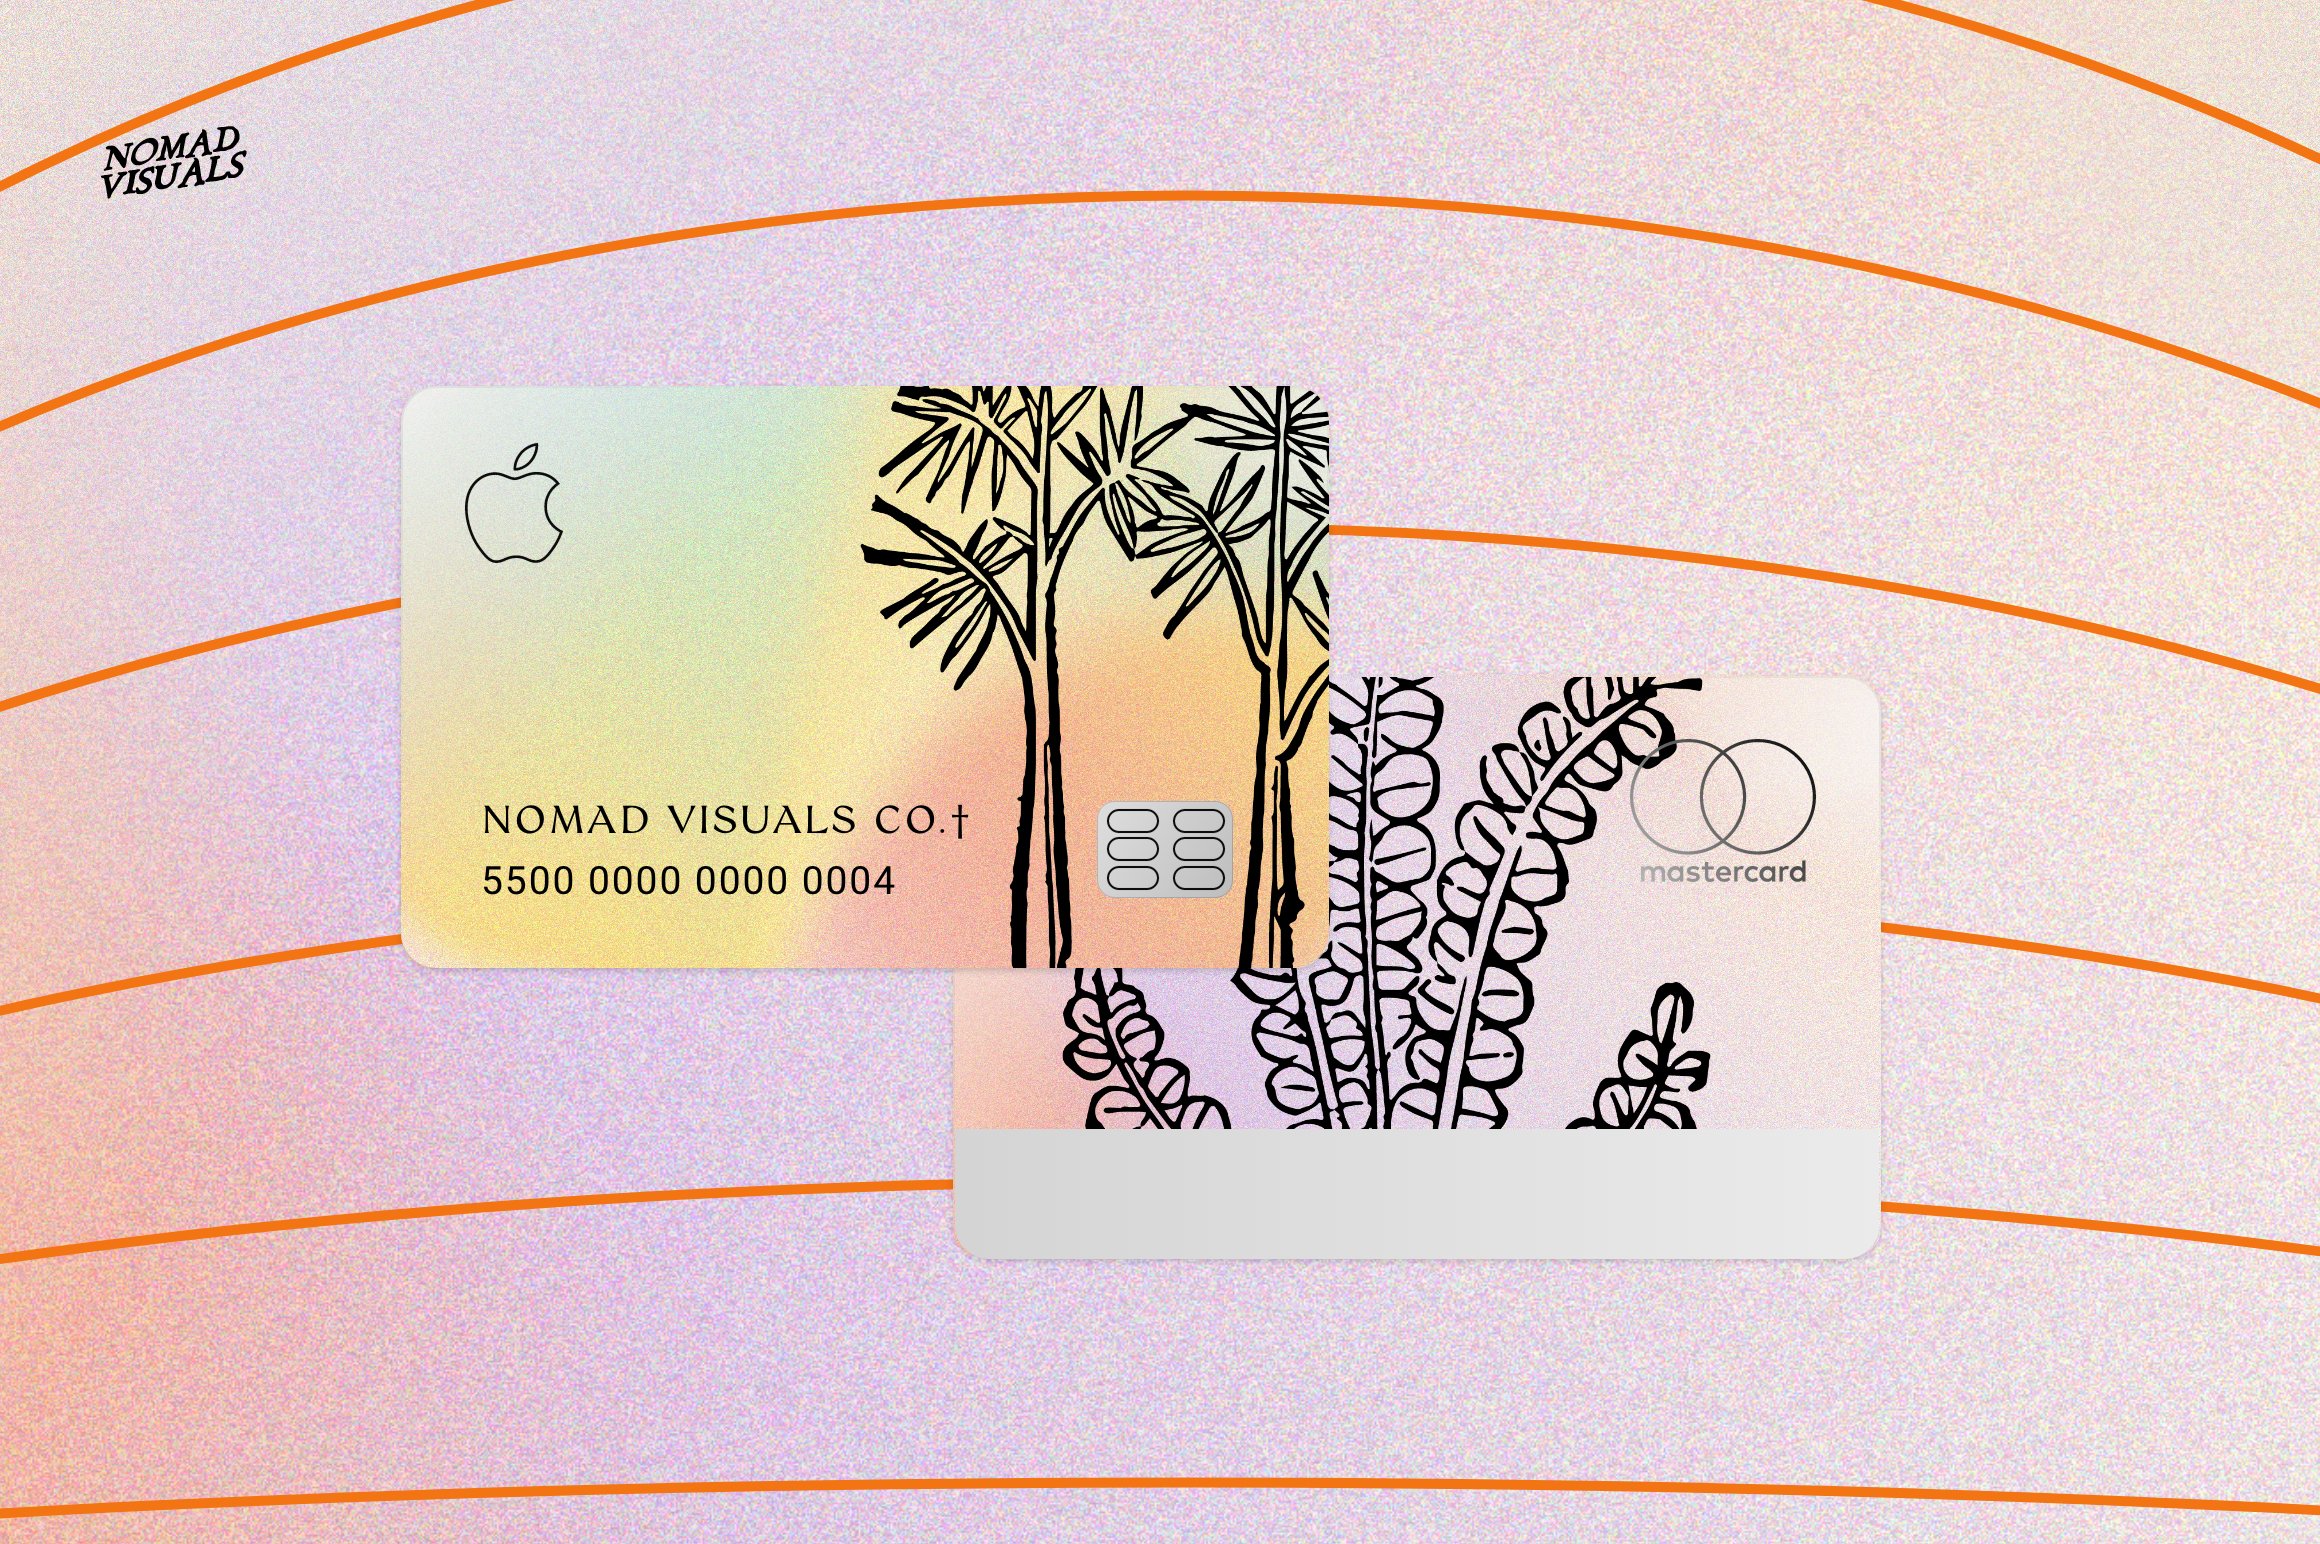 Credit card with a picture of palm trees on it.